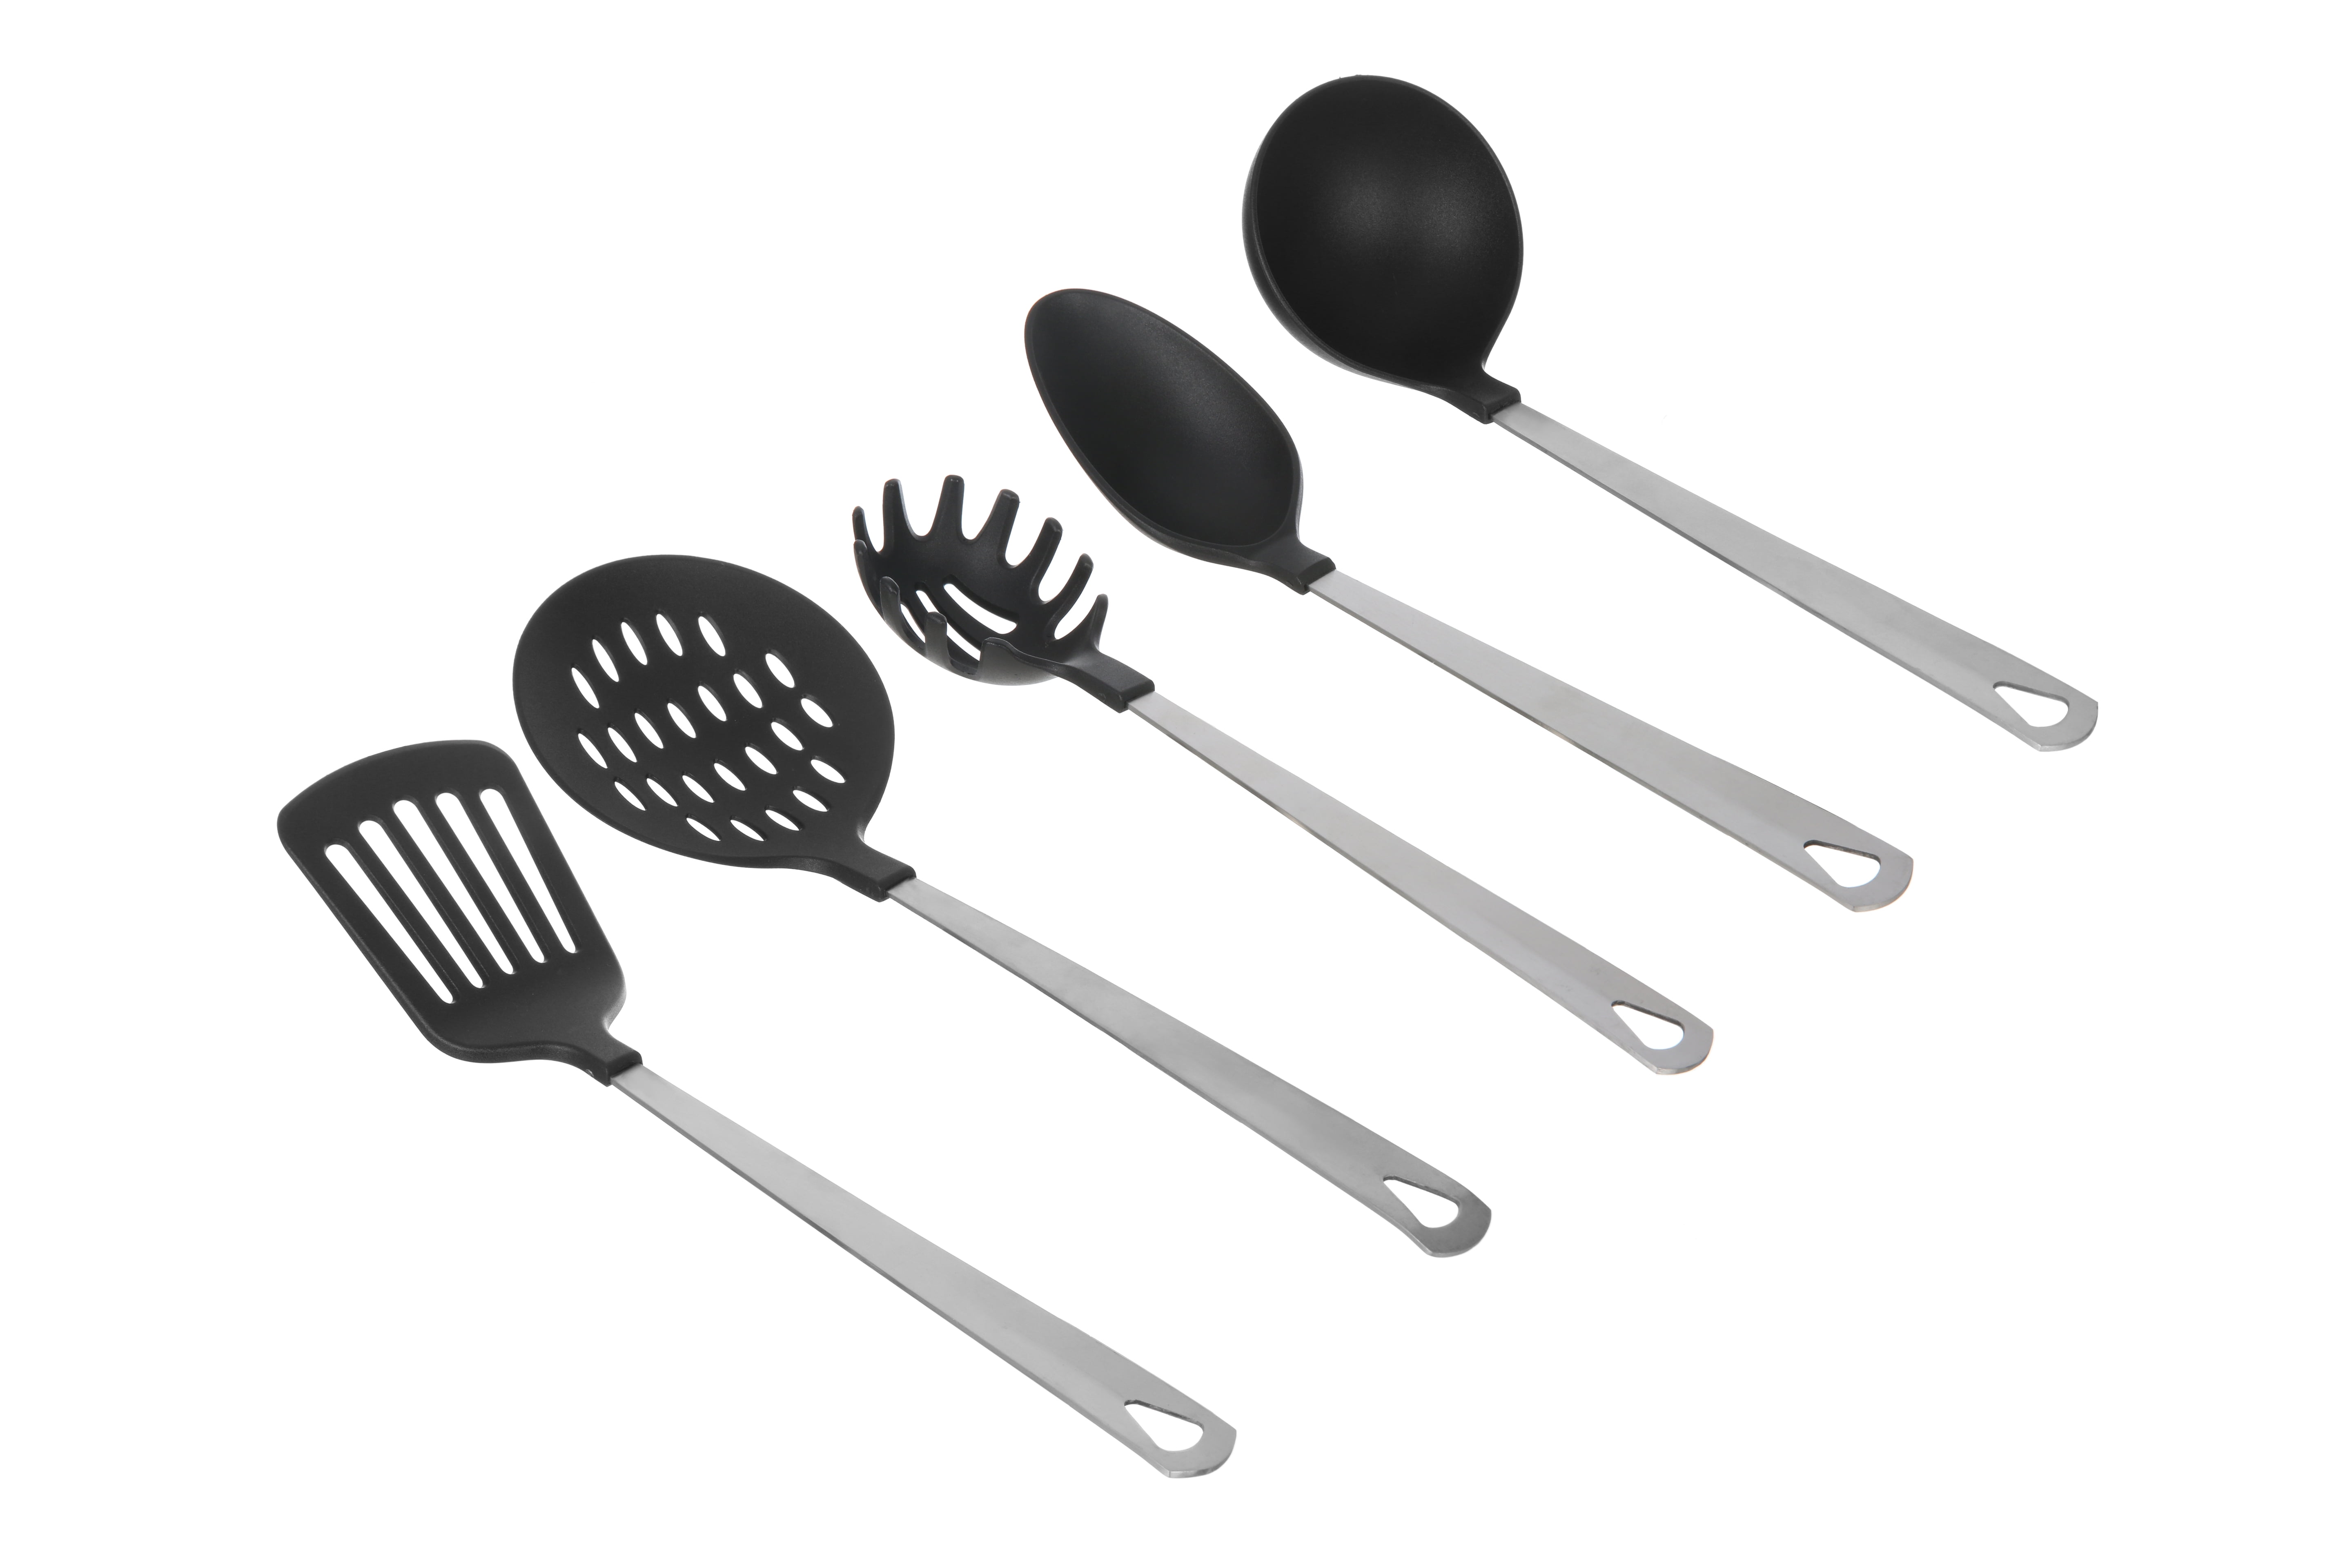 Mainstays Stainless Steel and Nylon Gadget Set, 5 Piece